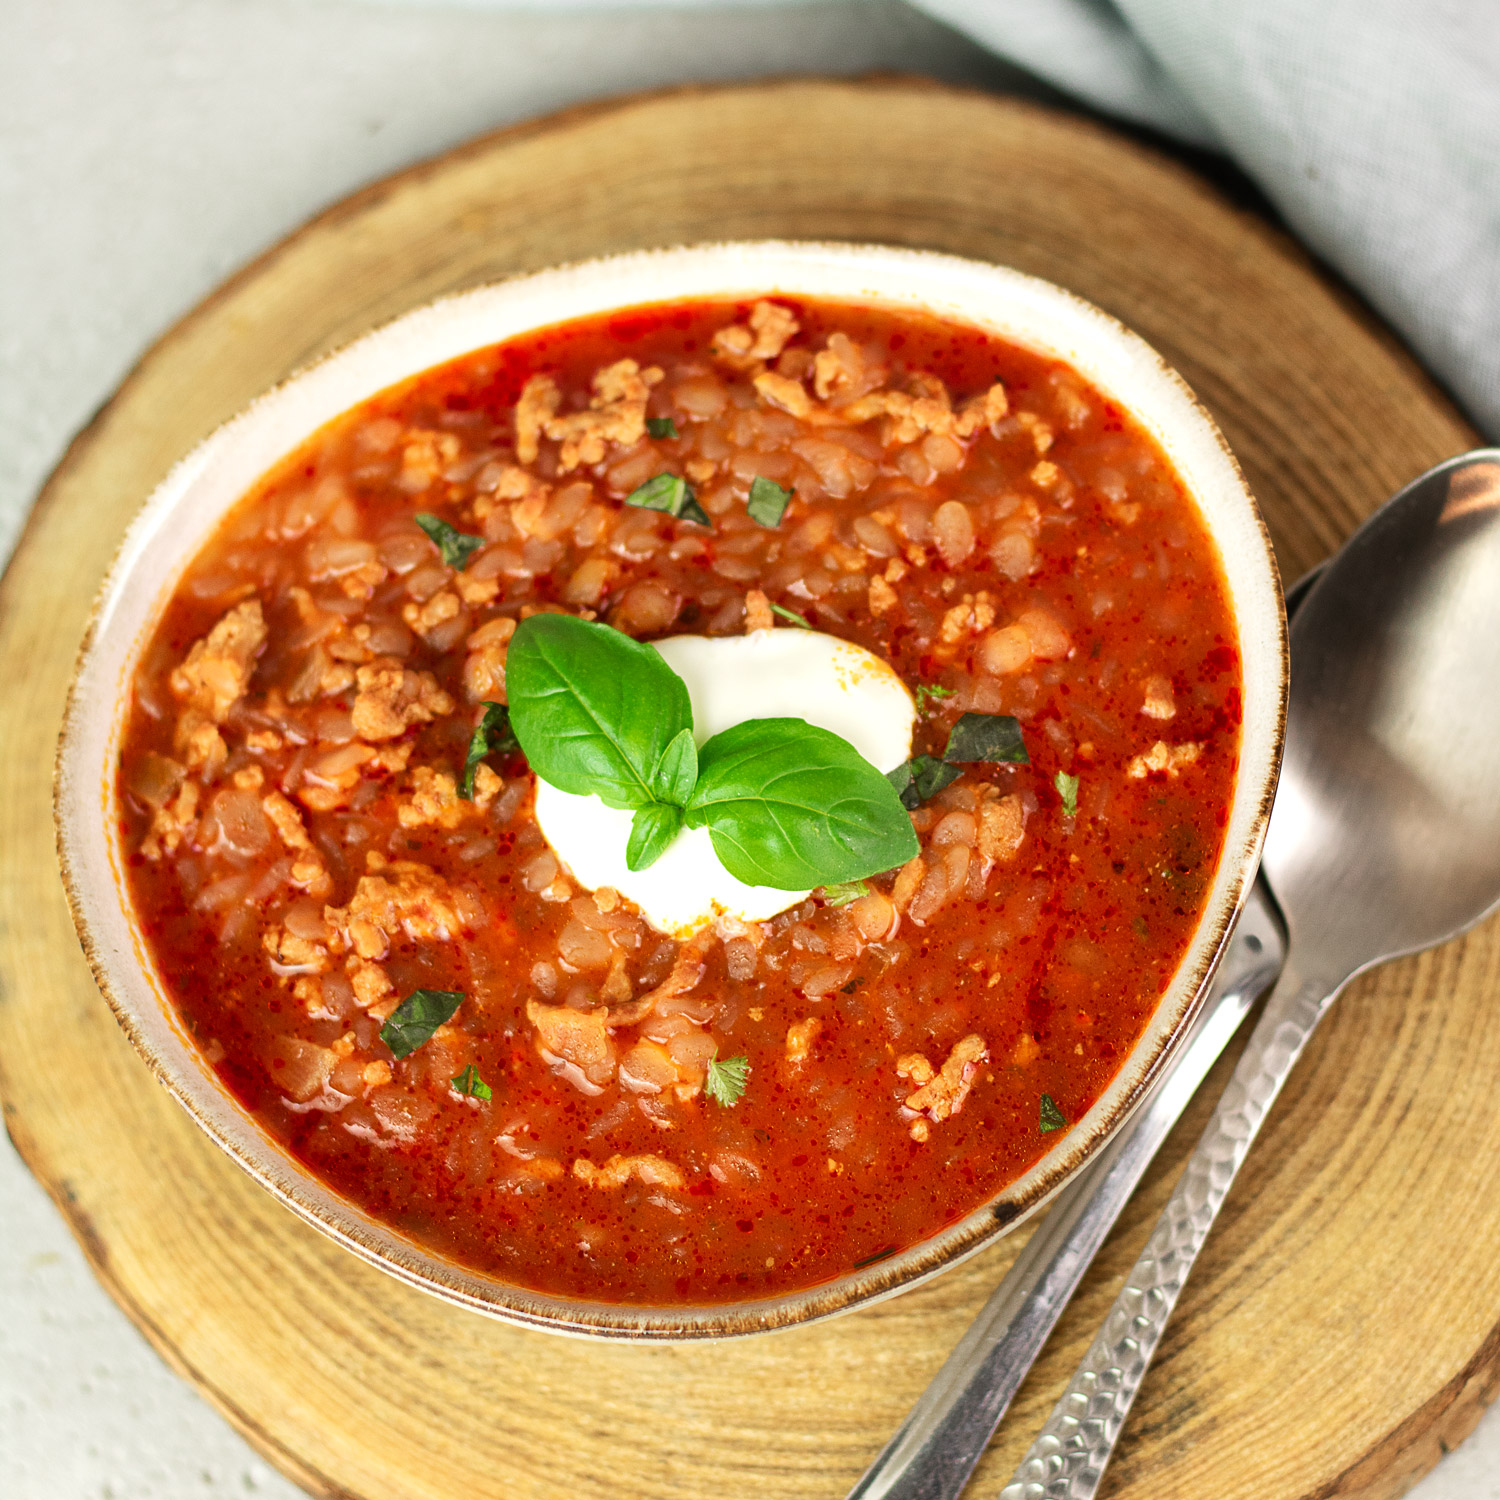 Super leckere Low Carb Low Carb Tomaten-Reis-Suppe